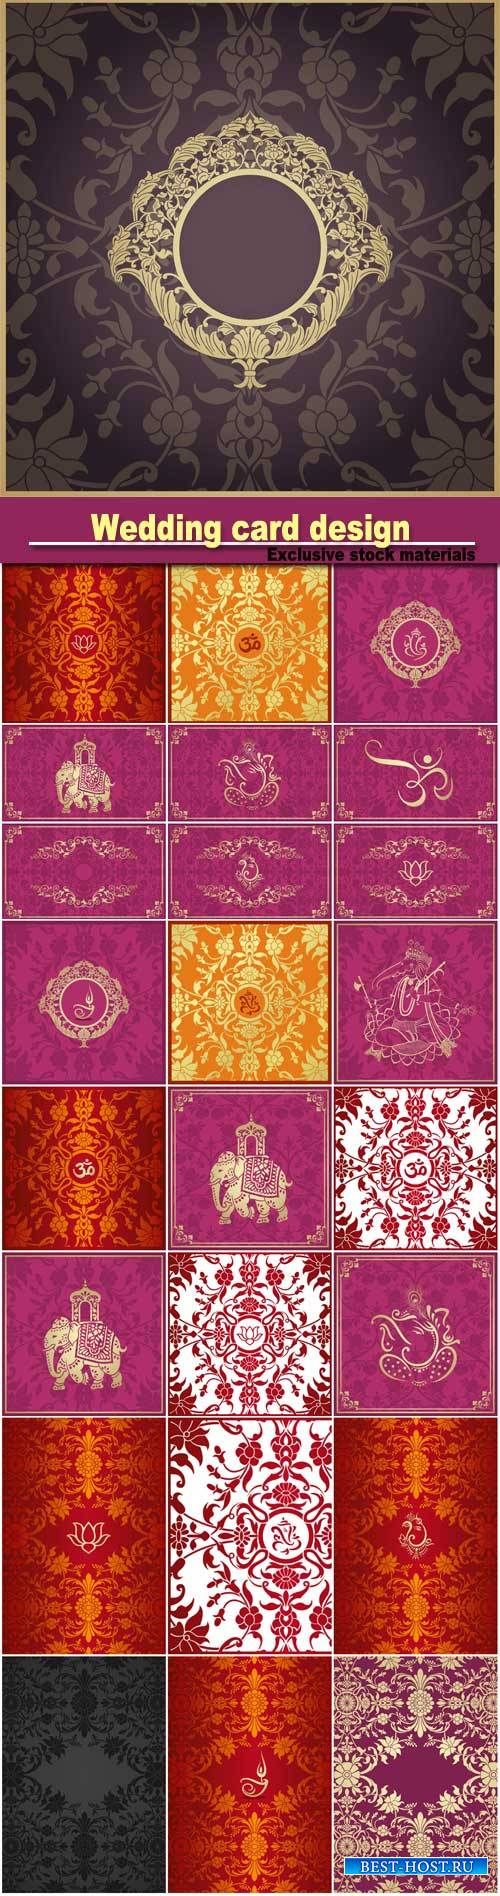 Wedding card design, paisley floral pattern, India